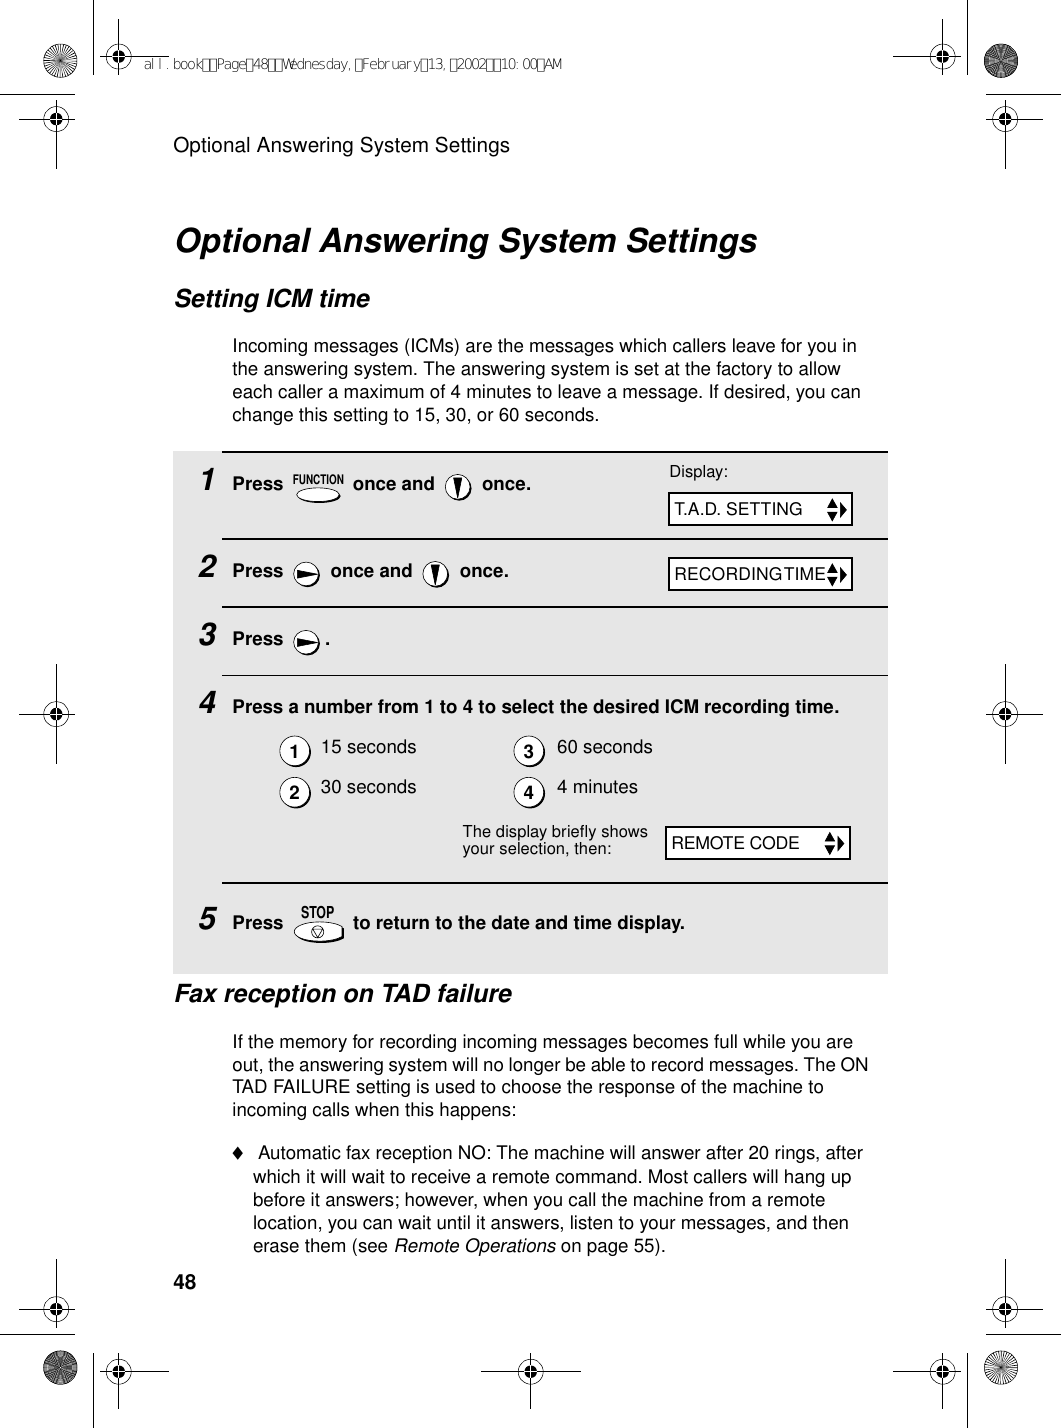 Optional Answering System Settings481Press   once and   once.2Press   once and   once.3Press .4Press a number from 1 to 4 to select the desired ICM recording time.5Press   to return to the date and time display.15 seconds 60 seconds30 seconds 4 minutesFUNCTIONSTOPOptional Answering System SettingsSetting ICM timeIncoming messages (ICMs) are the messages which callers leave for you in the answering system. The answering system is set at the factory to allow each caller a maximum of 4 minutes to leave a message. If desired, you can change this setting to 15, 30, or 60 seconds.Display:T.A.D. SETTINGRECORDING TIME1234The display briefly shows your selection, then:REMOTE CODEFax reception on TAD failureIf the memory for recording incoming messages becomes full while you are out, the answering system will no longer be able to record messages. The ON TAD FAILURE setting is used to choose the response of the machine to incoming calls when this happens:♦ Automatic fax reception NO: The machine will answer after 20 rings, after which it will wait to receive a remote command. Most callers will hang up before it answers; however, when you call the machine from a remote location, you can wait until it answers, listen to your messages, and then erase them (see Remote Operations on page 55).all.bookPage48Wednesday,February13,200210:00AM